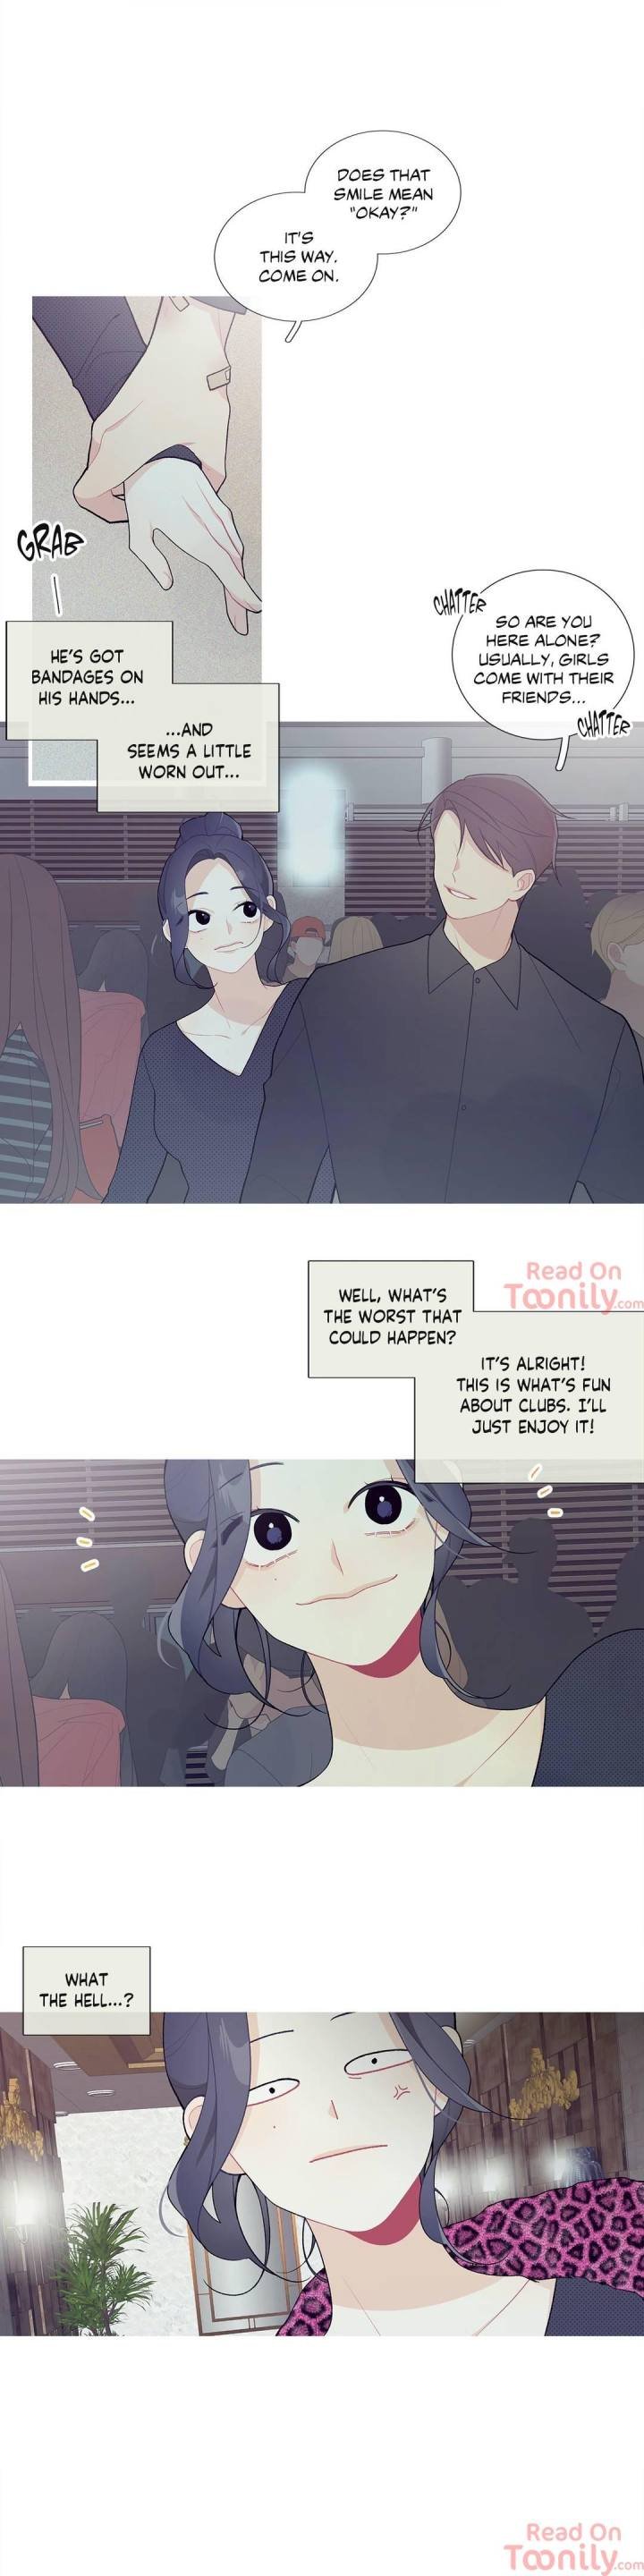 whats-going-on-chap-34-2